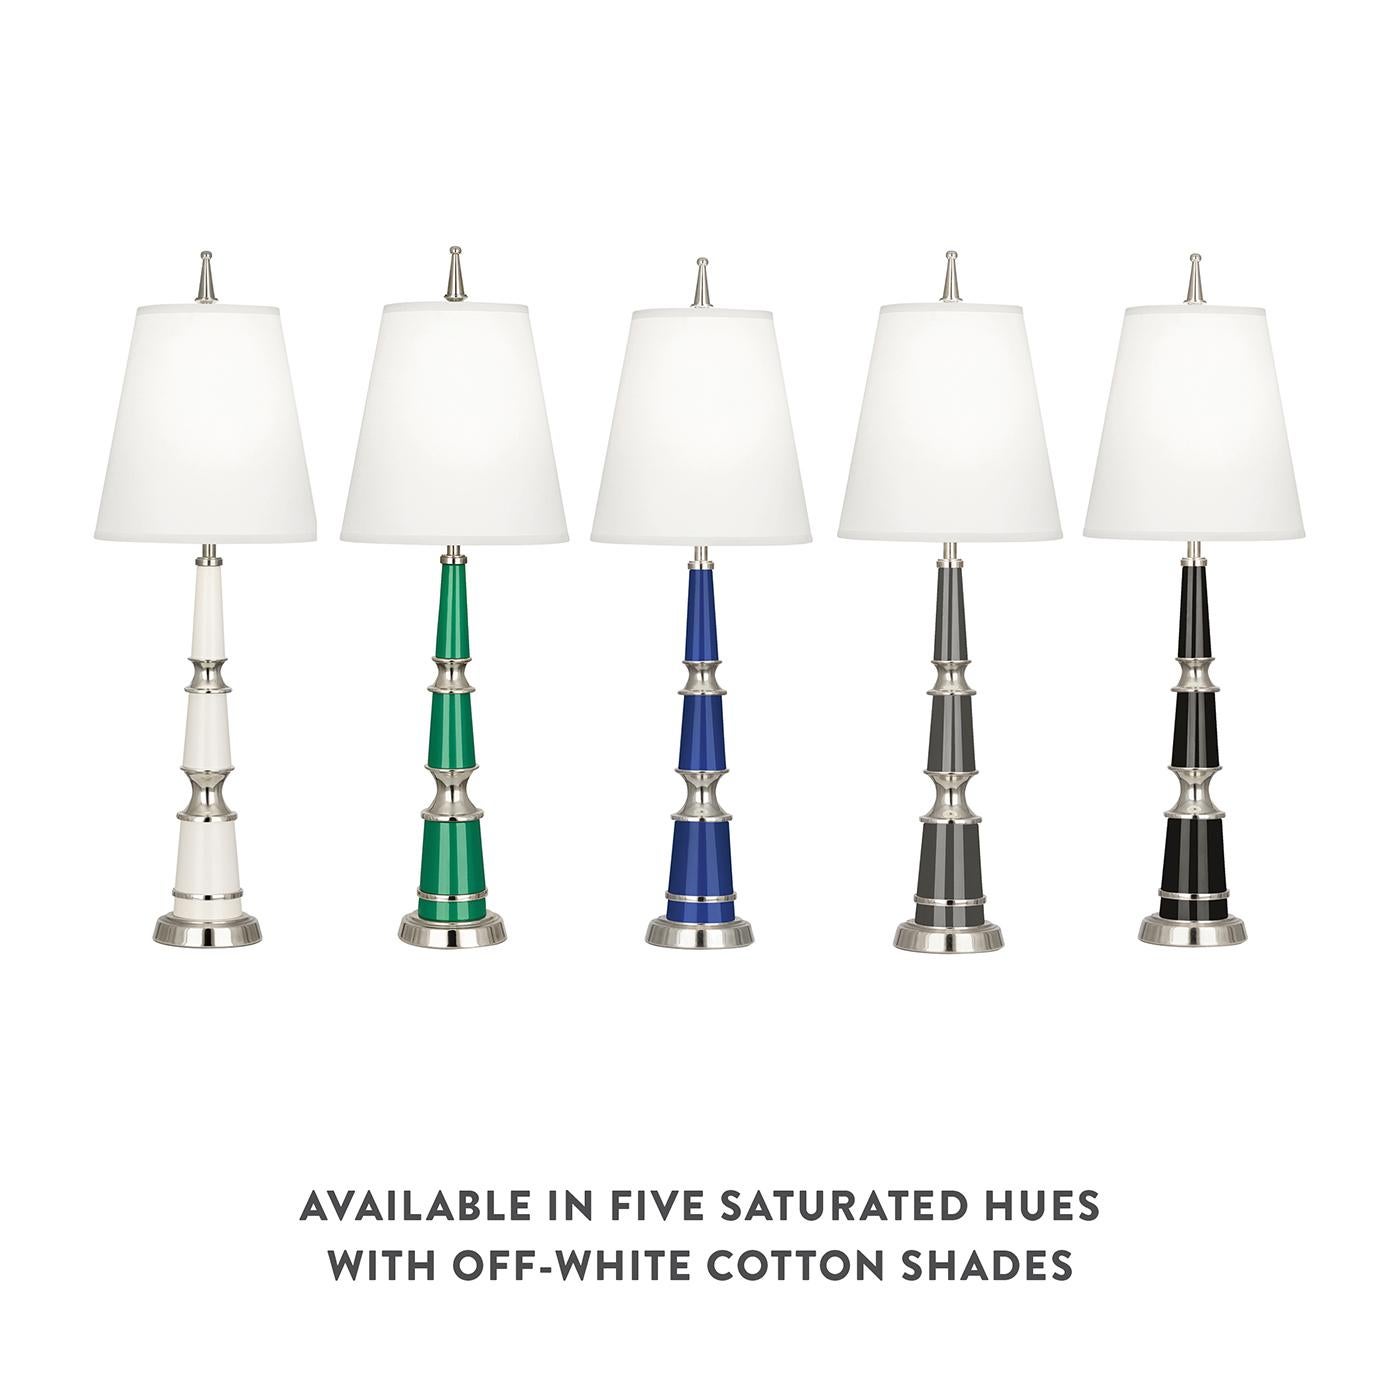 Colorful classicism. Inspired by scrolling neoclassical candlesticks, our Versailles collection is boldly traditional and totally today, thanks to a smart combo of powder-coated color with natural nickel accents.

Candlestick lamps, like our